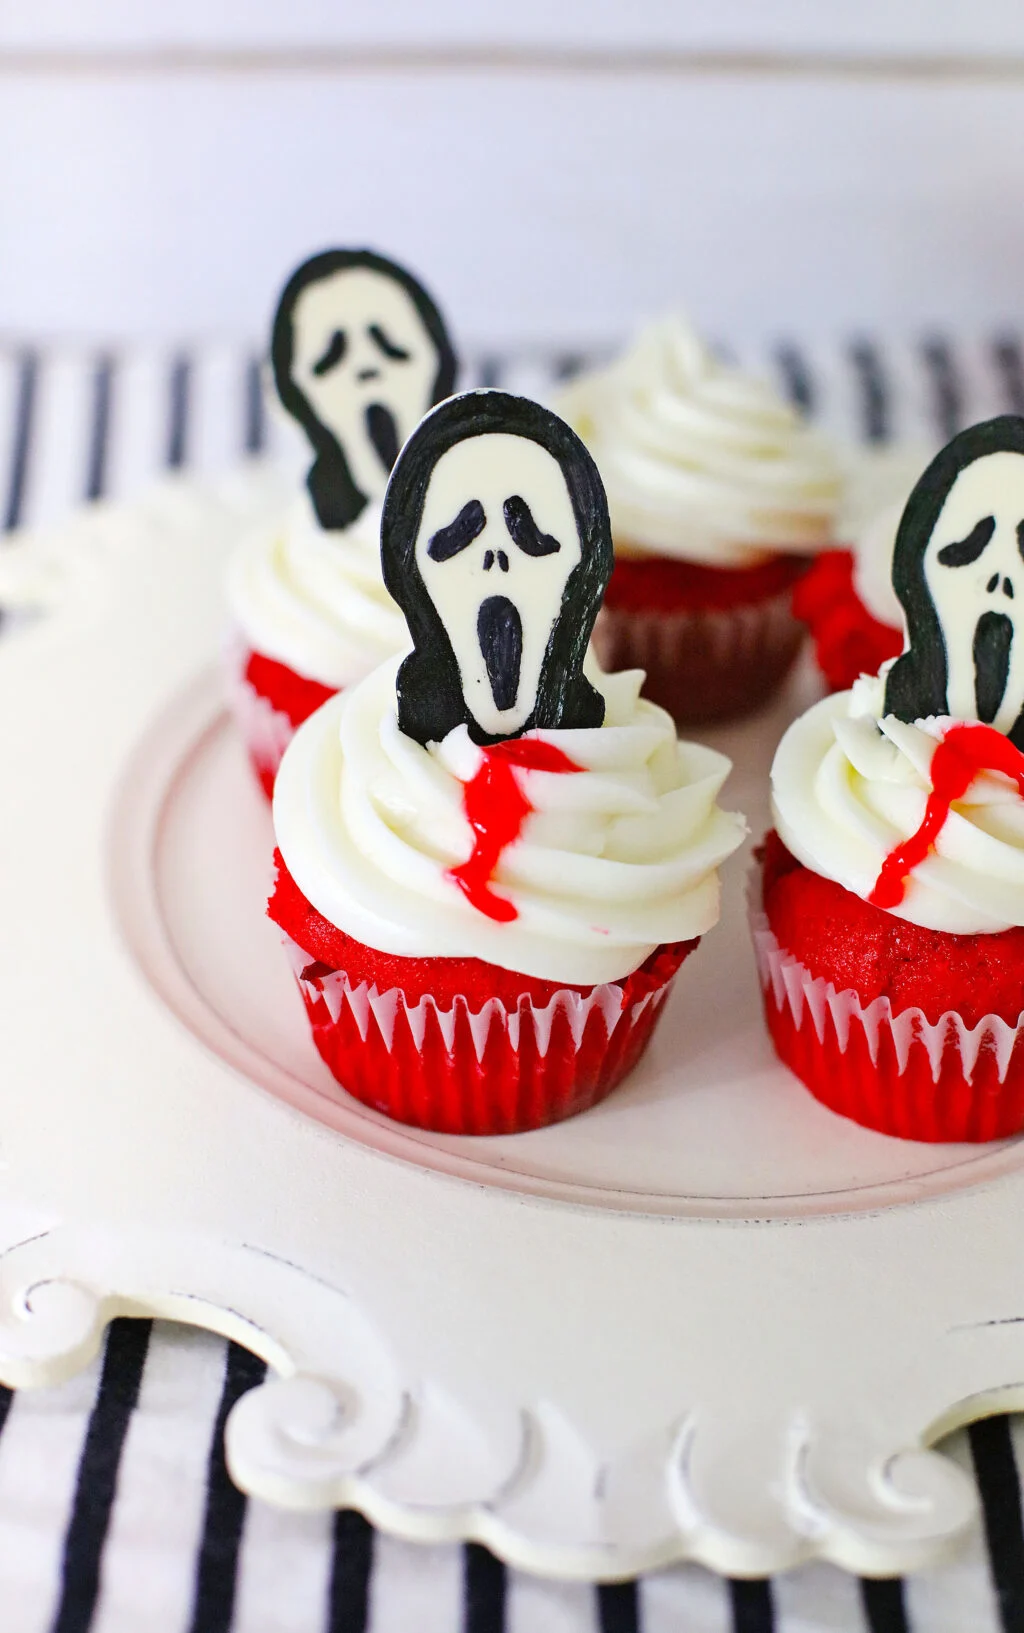 upclose of scream cupcakes on a serving tray for Halloween